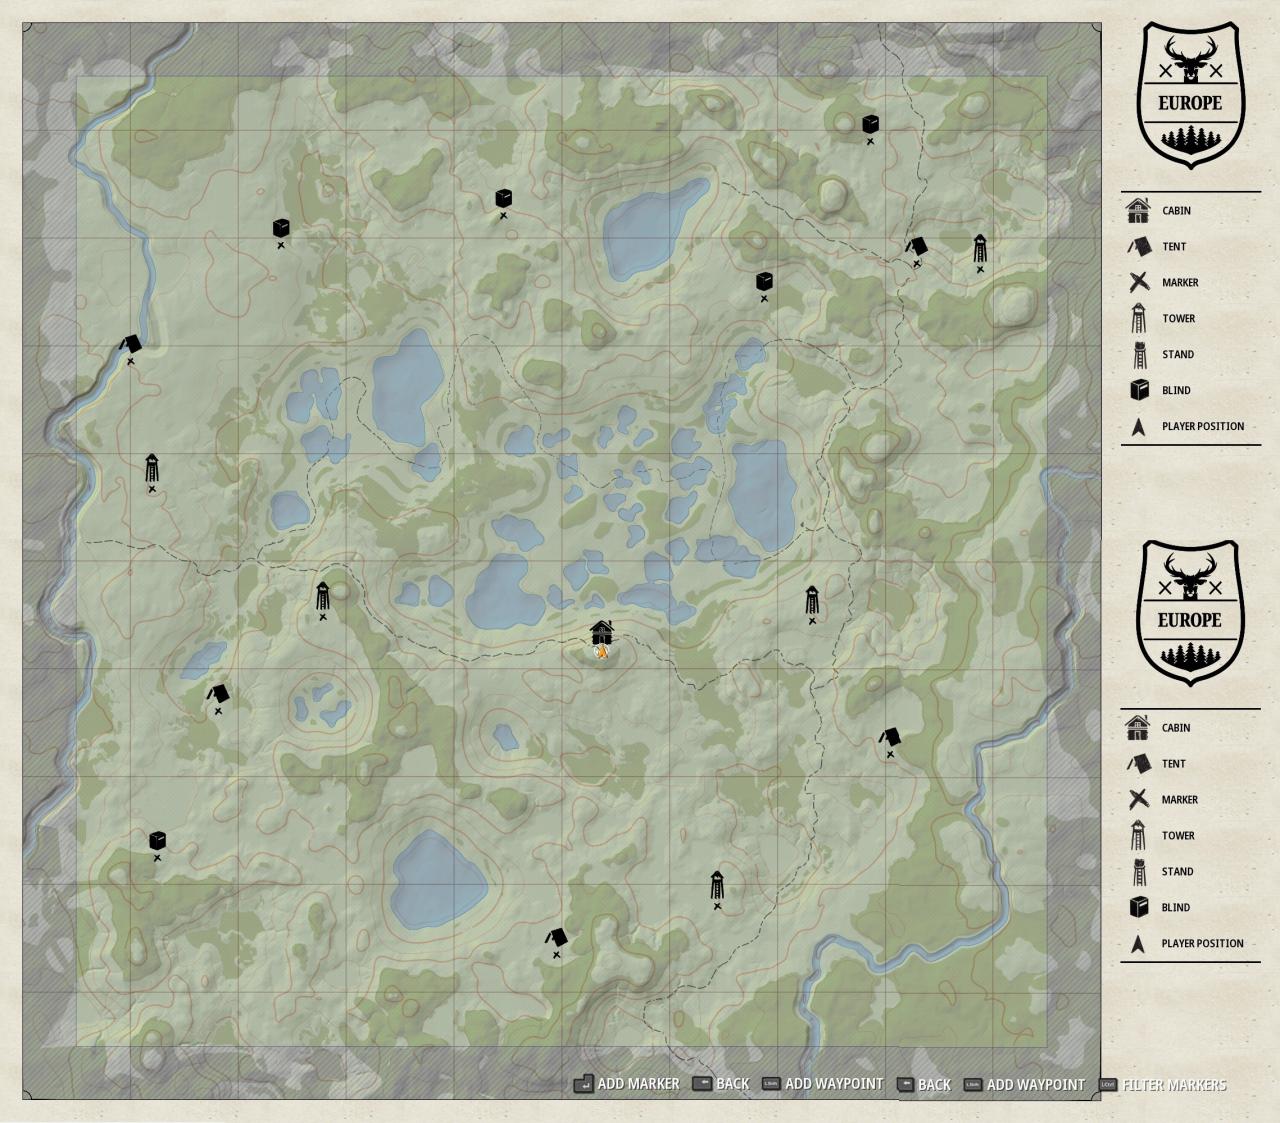 Hunting Simulator 2 Points of Interest Guide (Colorado, Texas, Europe)